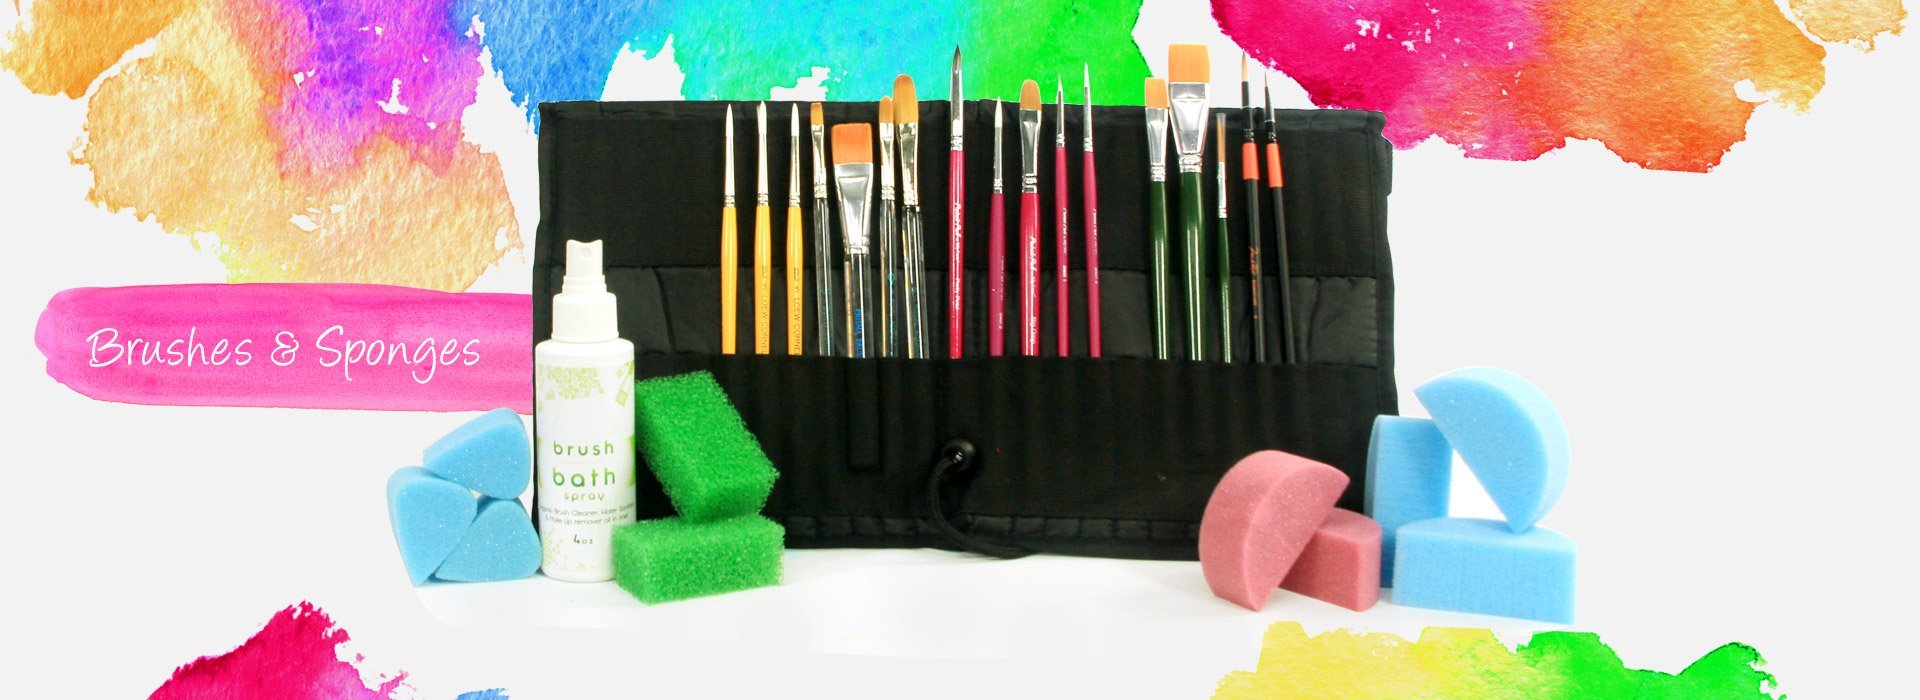 Brushes & Sponges | Silly Farm Supplies